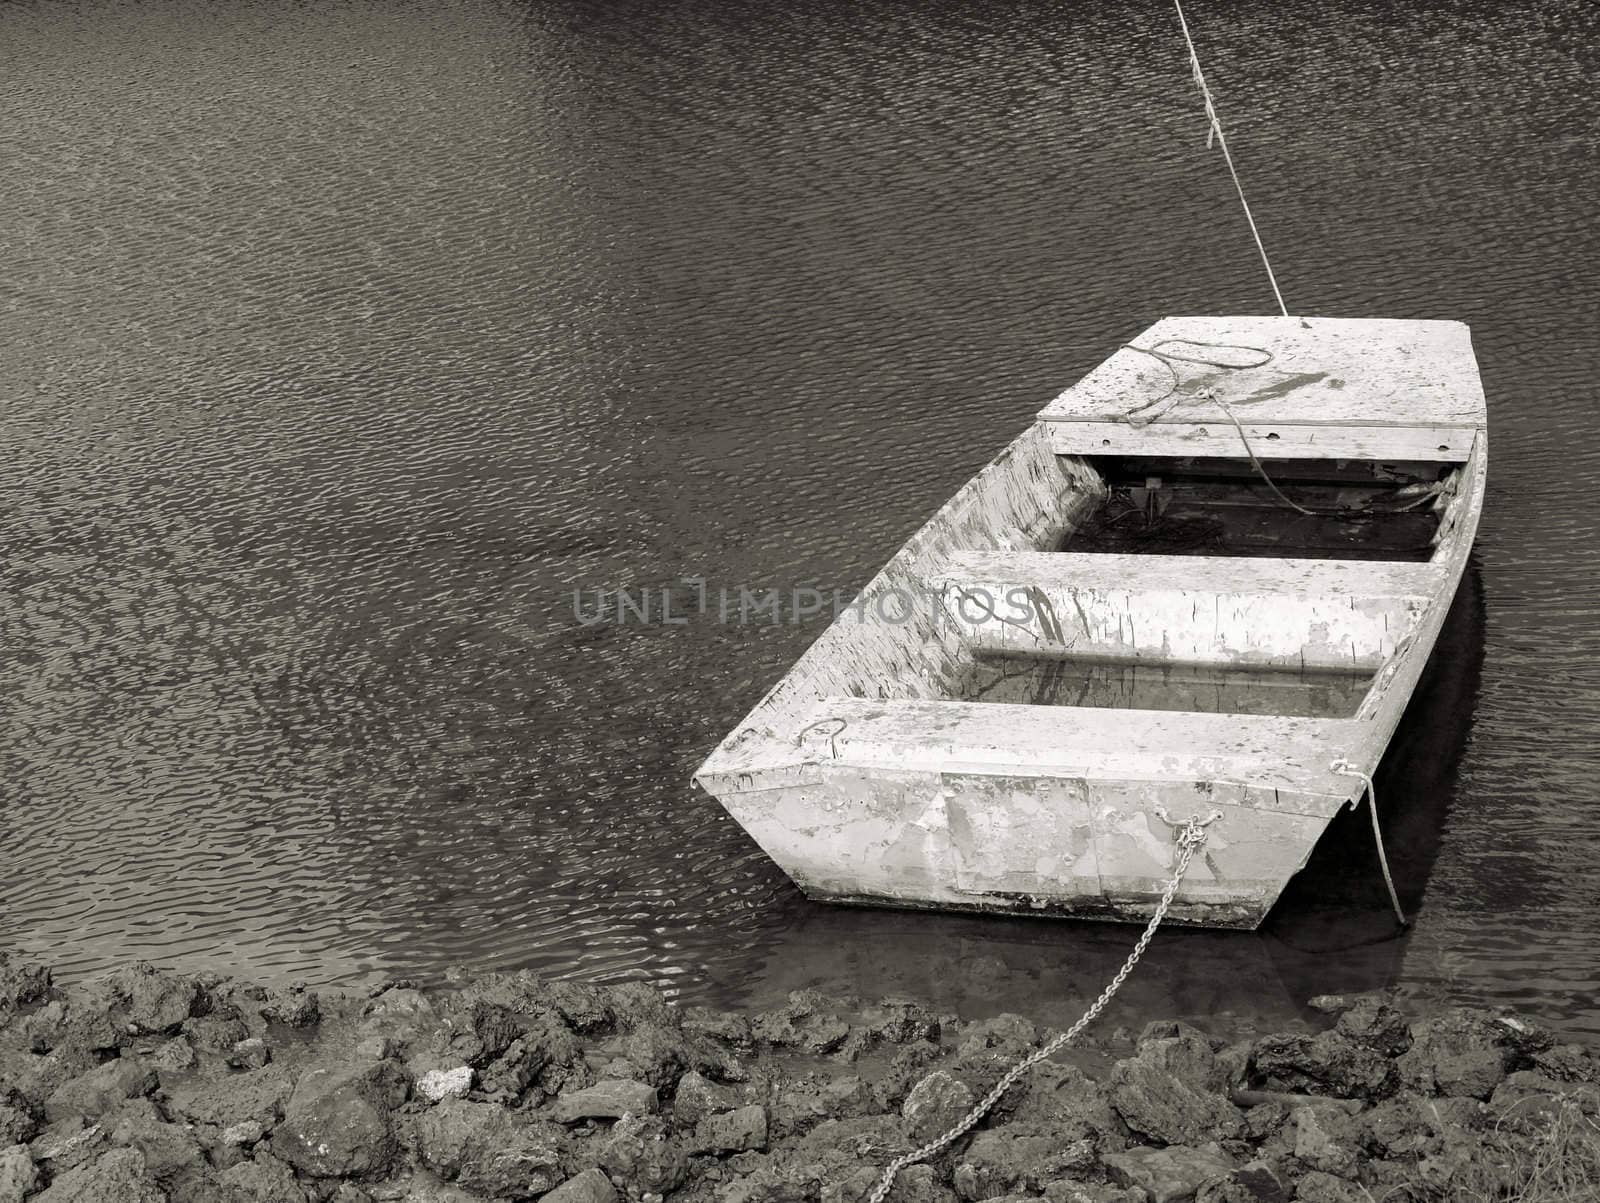 Old boat along the shore in very poor condition shown in black and white